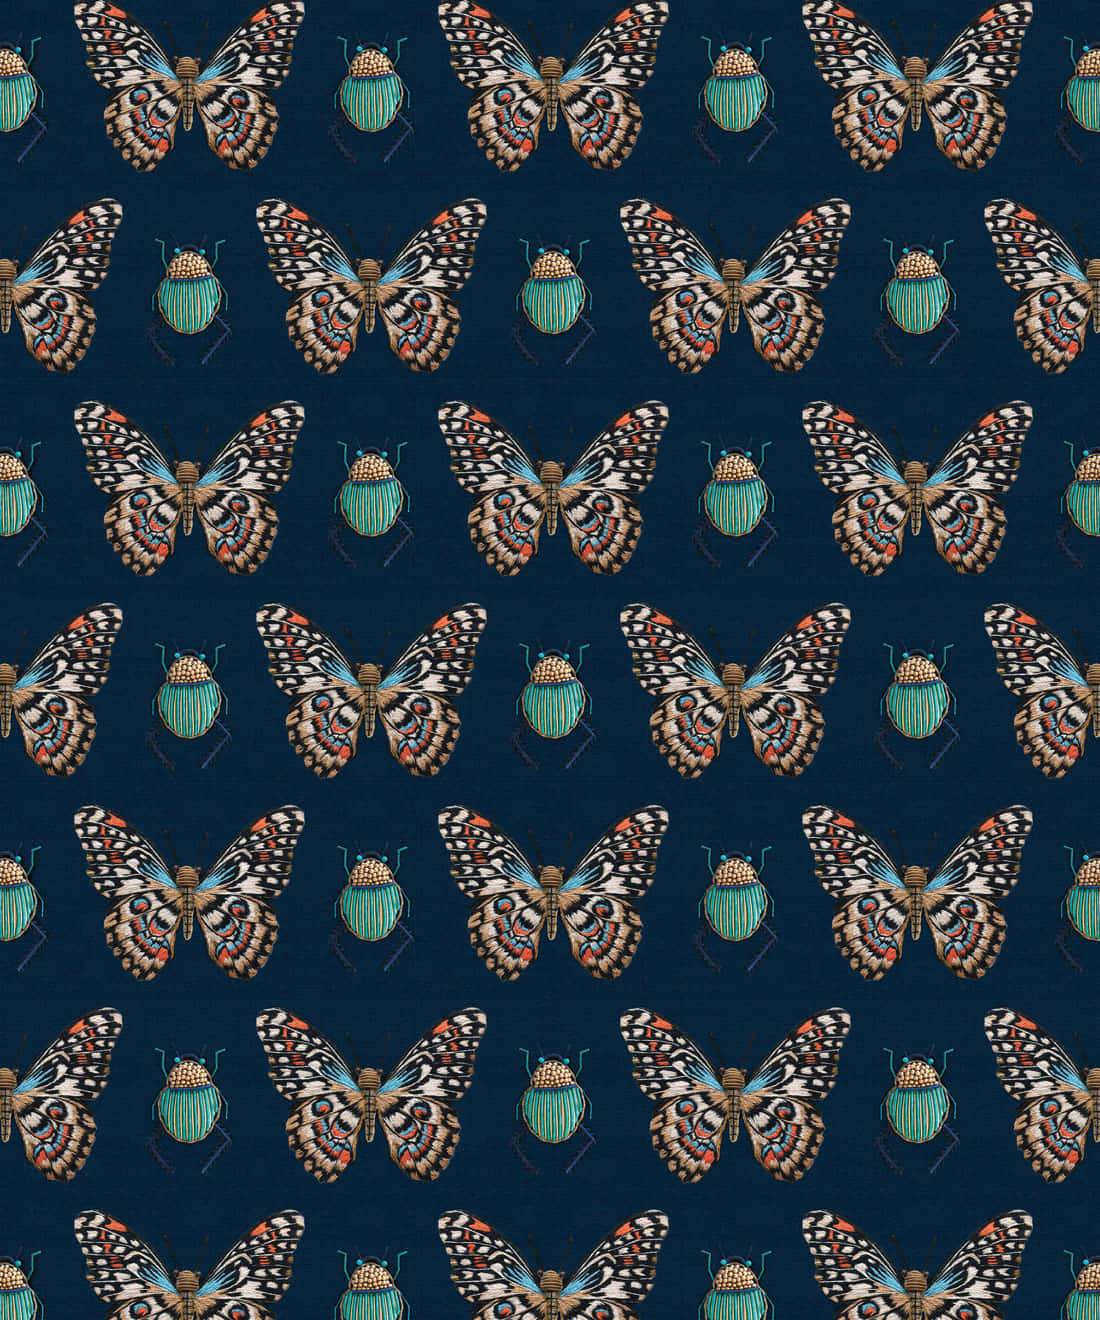 Dark Insects Wall Decor Wallpaper